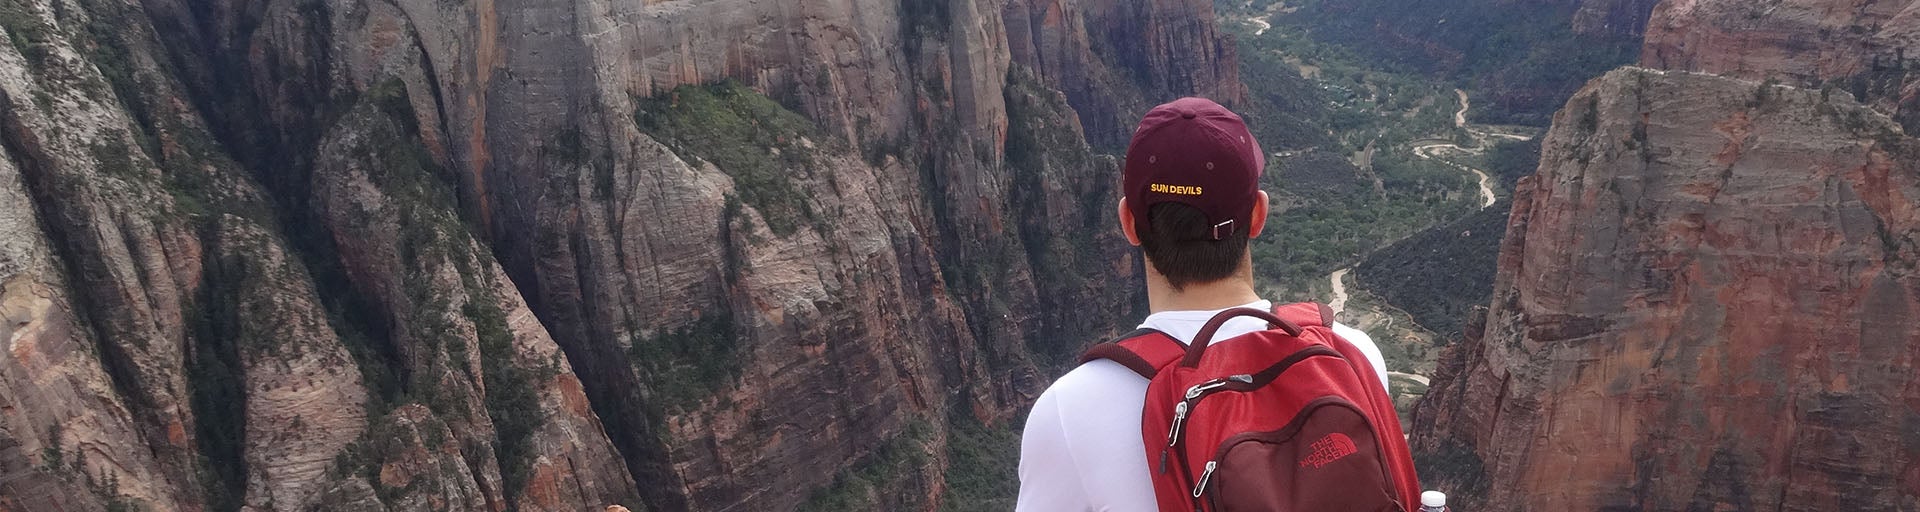 Student wearing a backpack and hat, overlooking an Arizona canyon